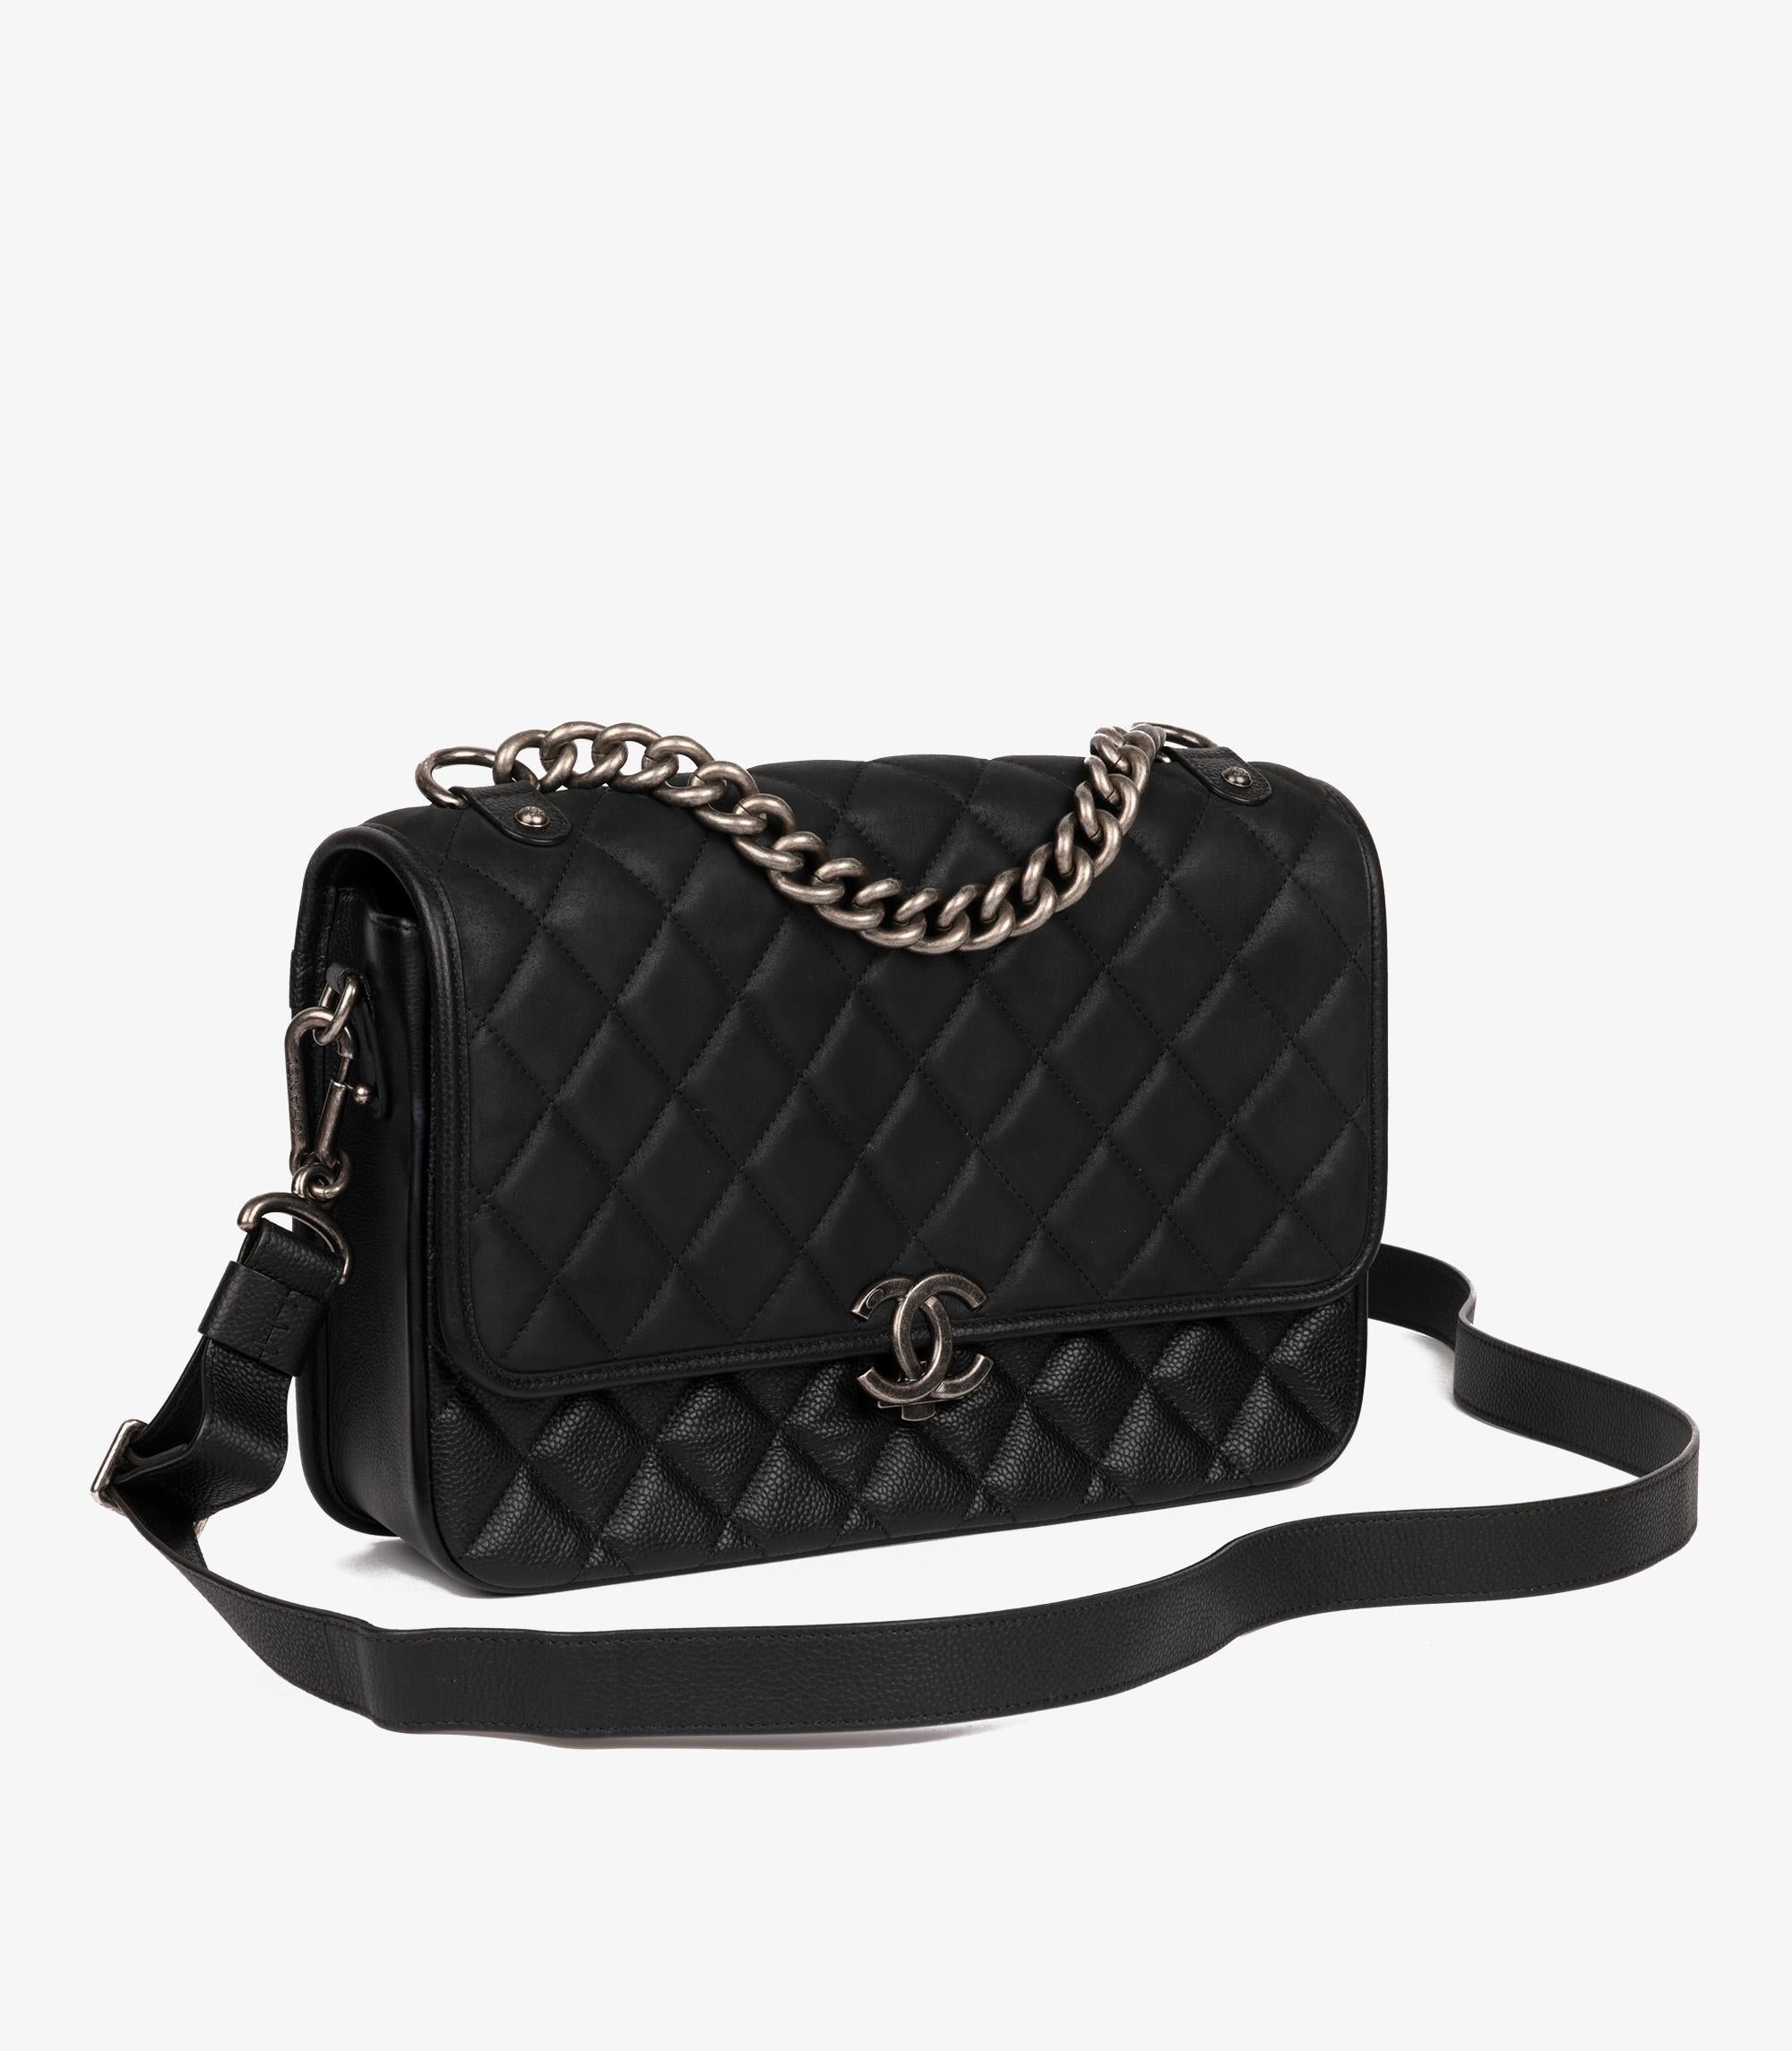 Chanel Black Quilted Caviar Leather & Iridescent Calfskin Daily Carry Messenger For Sale 5